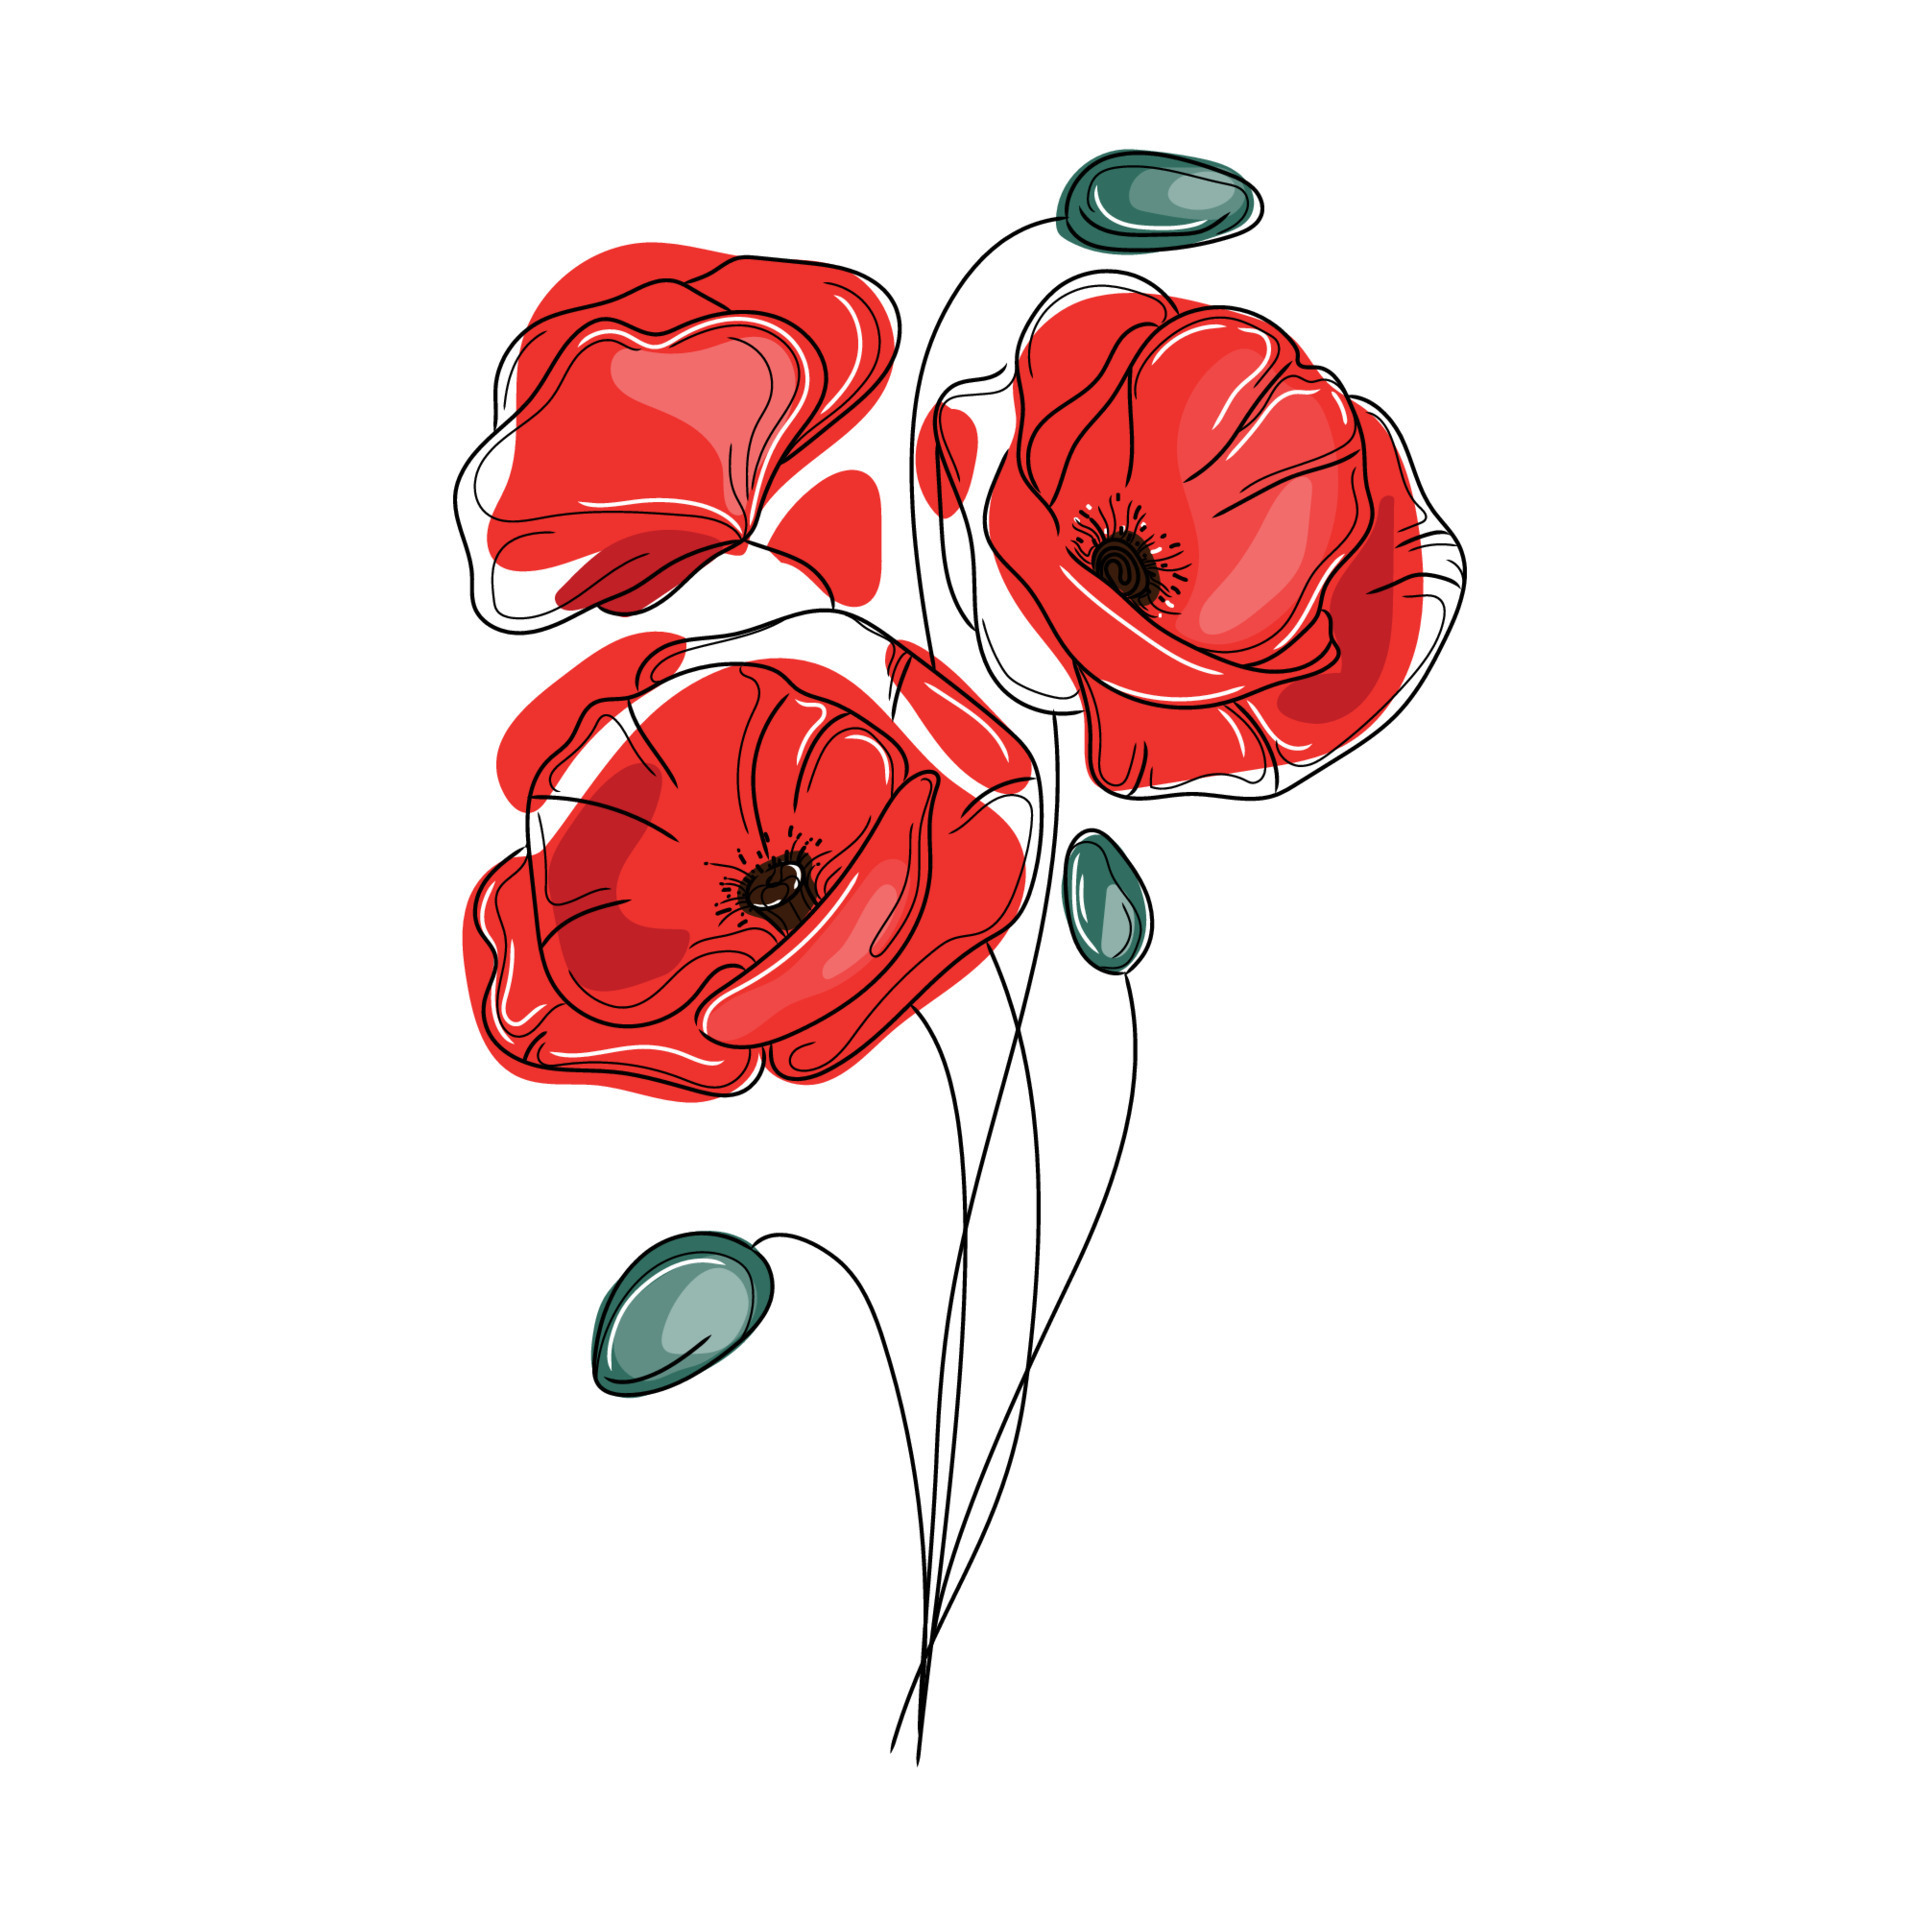 Abstract Red Poppies Flowers Vector